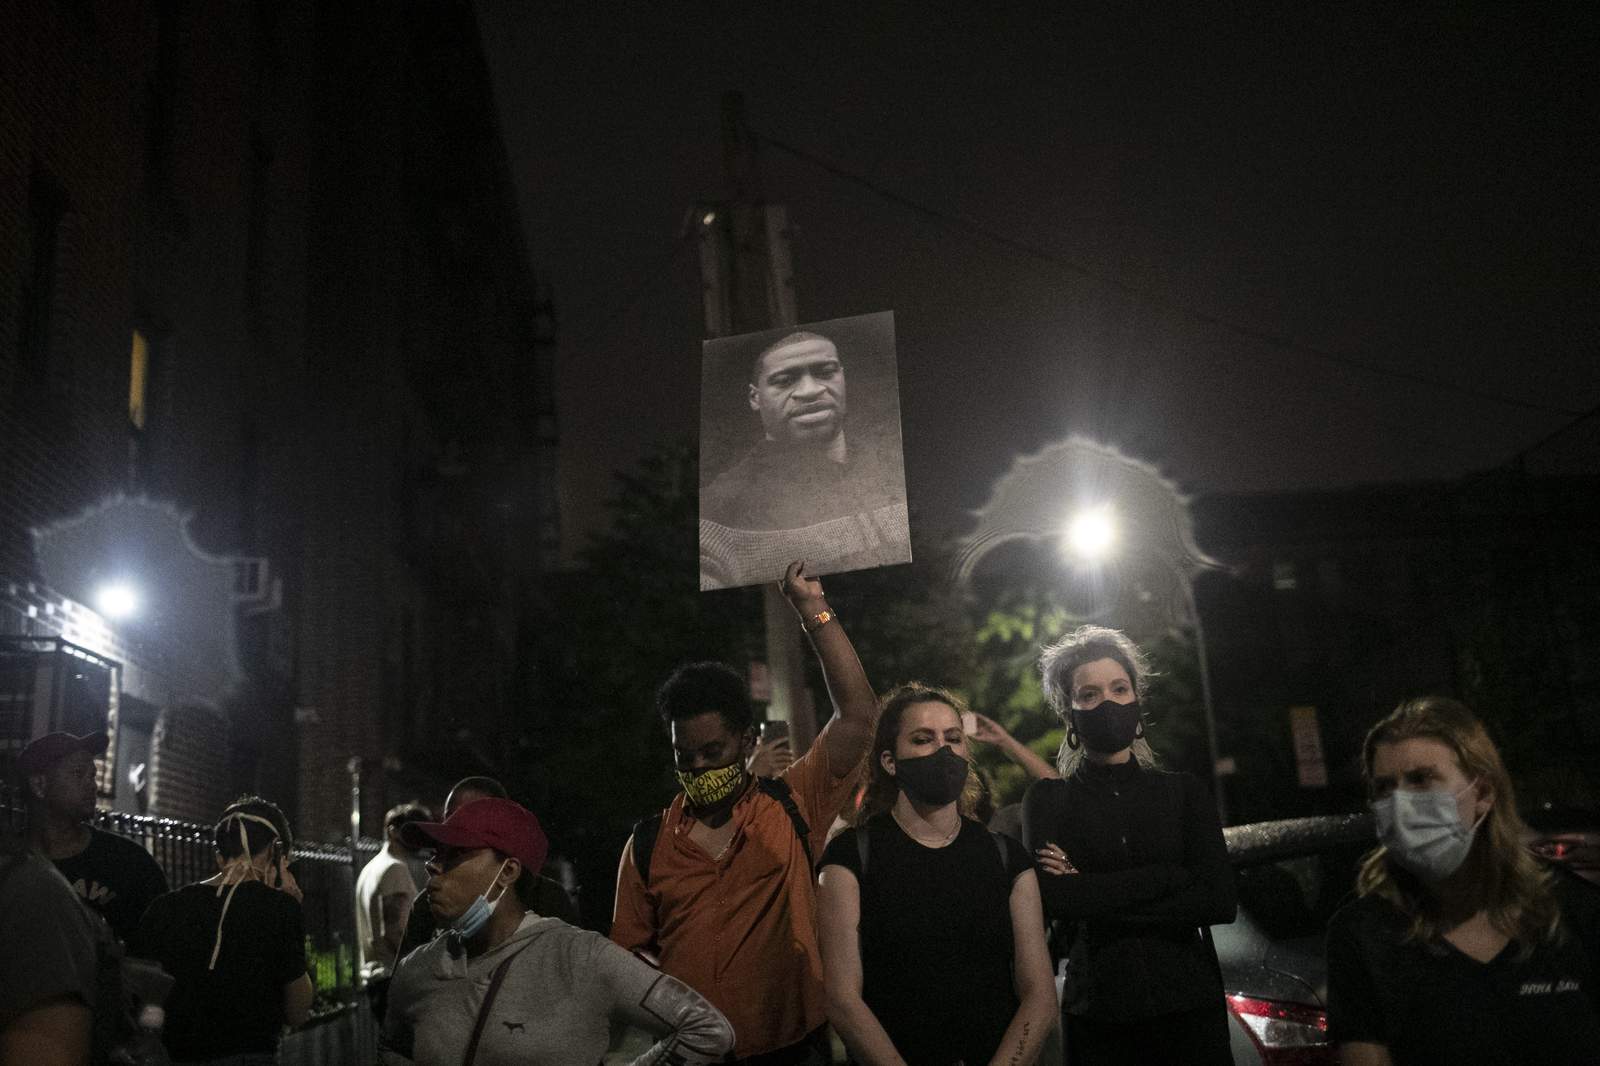 New York City curfew lifts early following peaceful protests